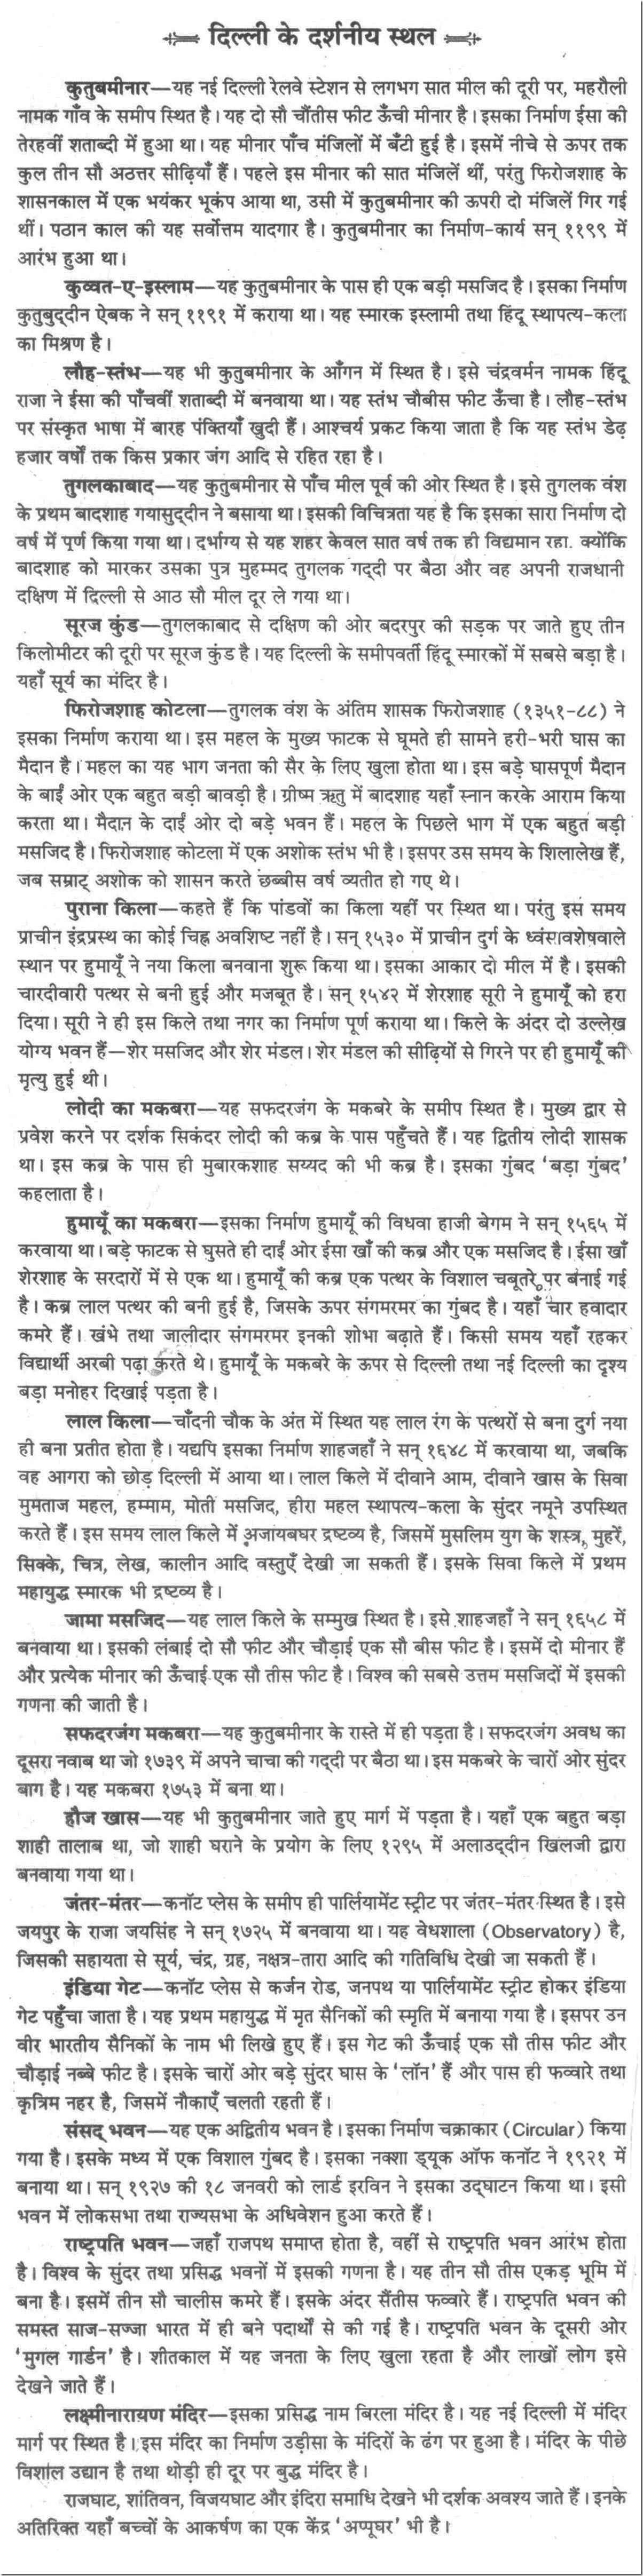 essay on my favourite tourist place in hindi